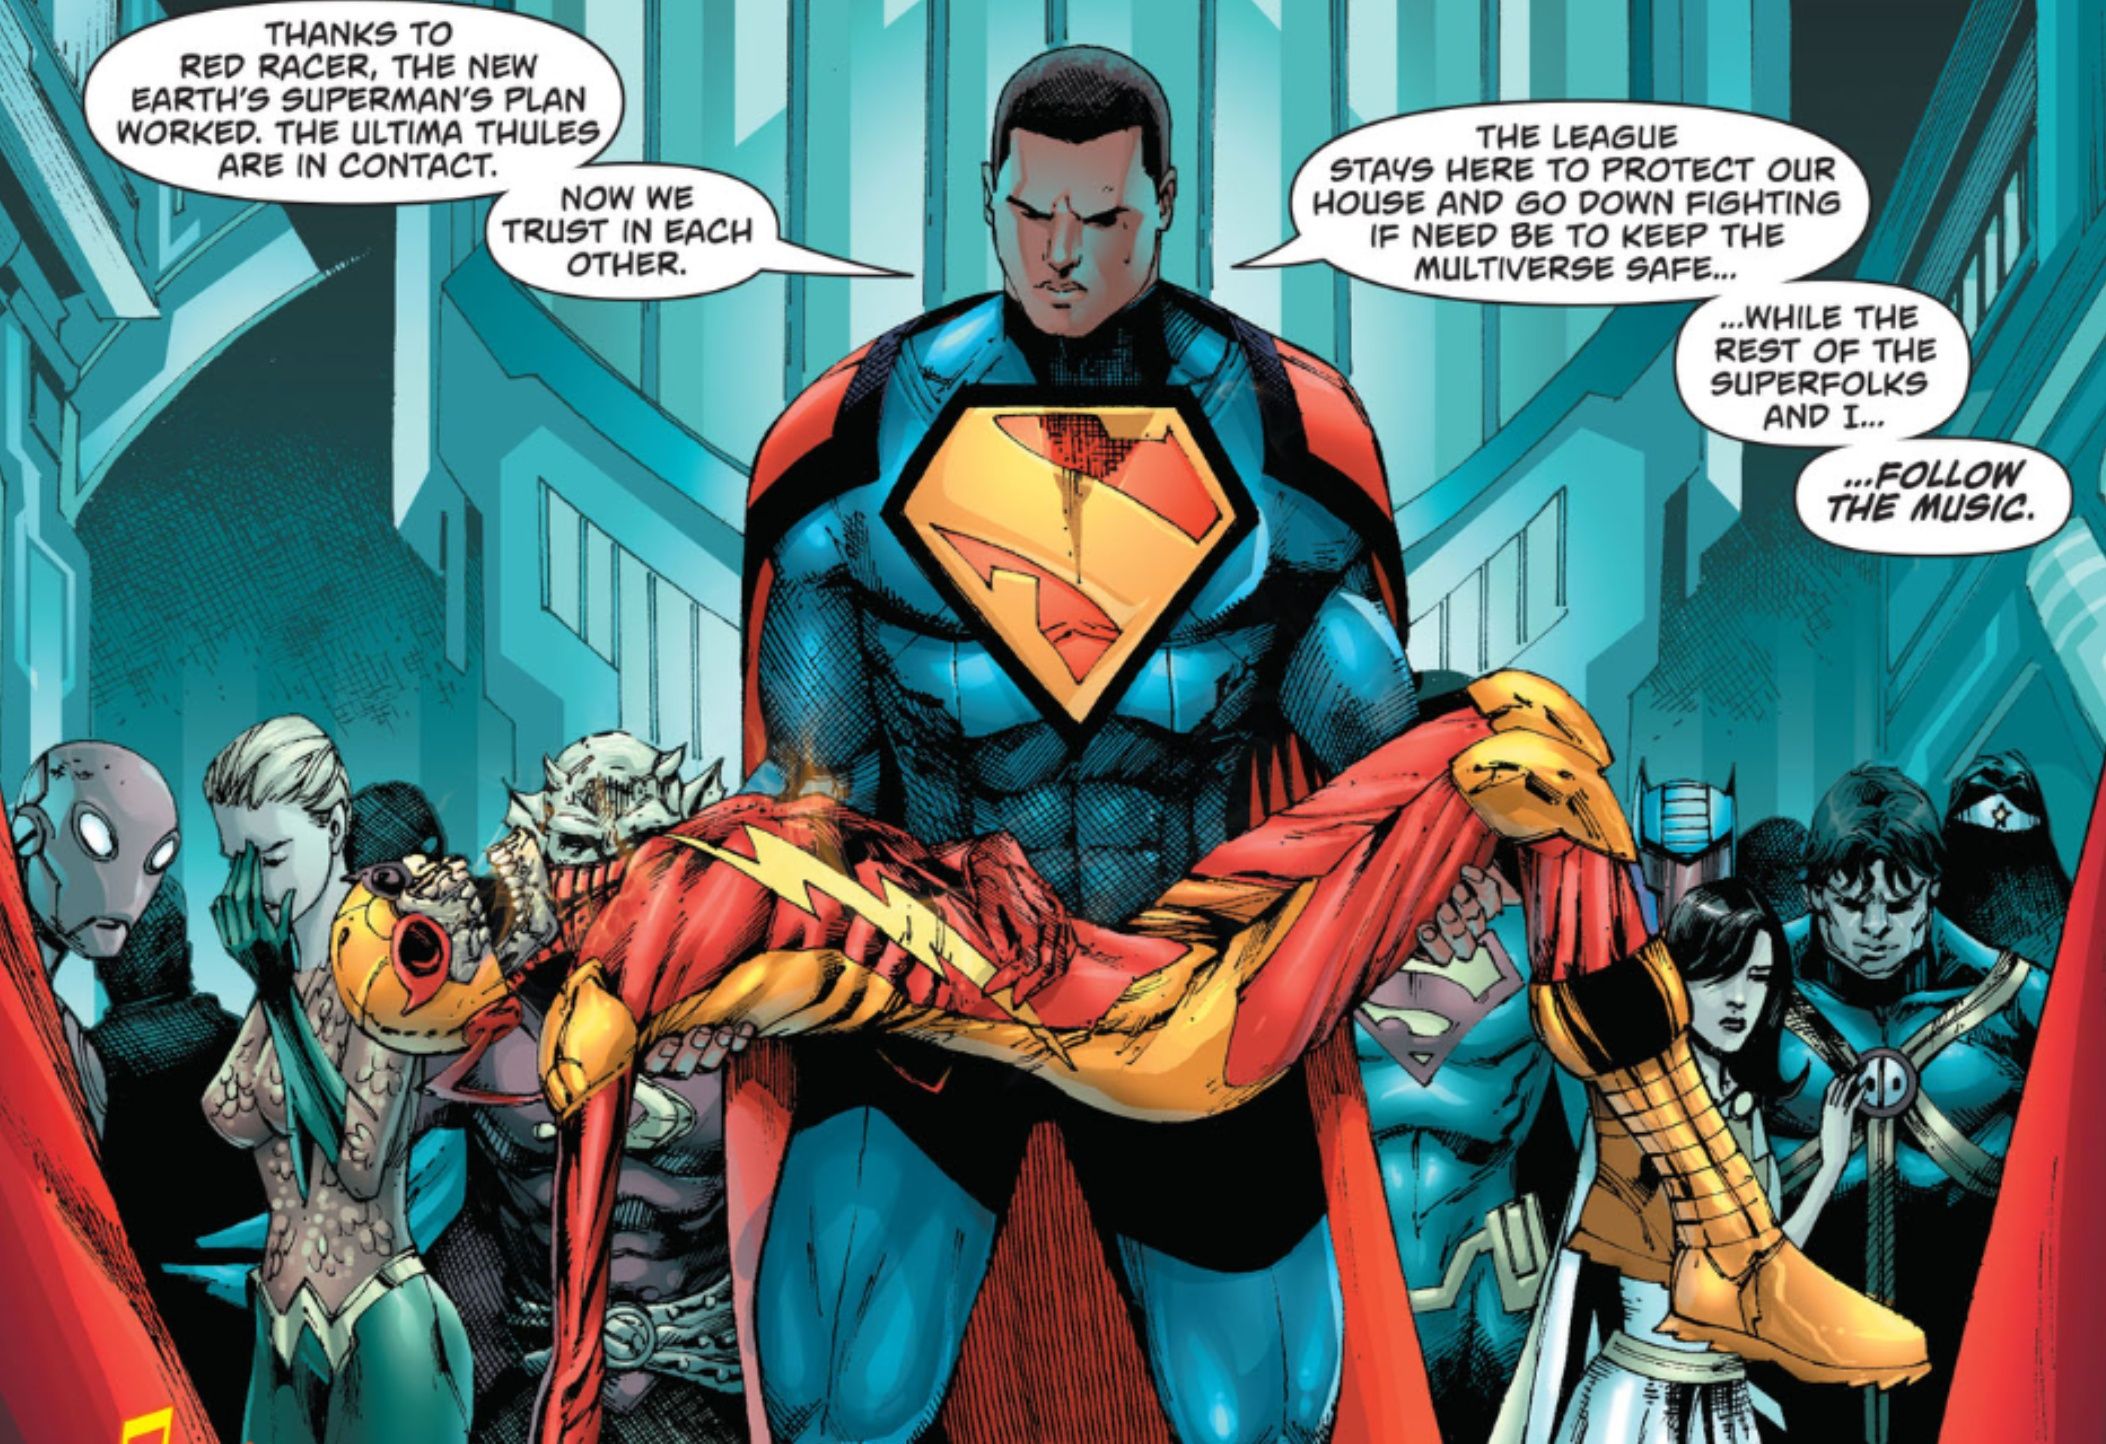 Death of Red Racer in Superman #16